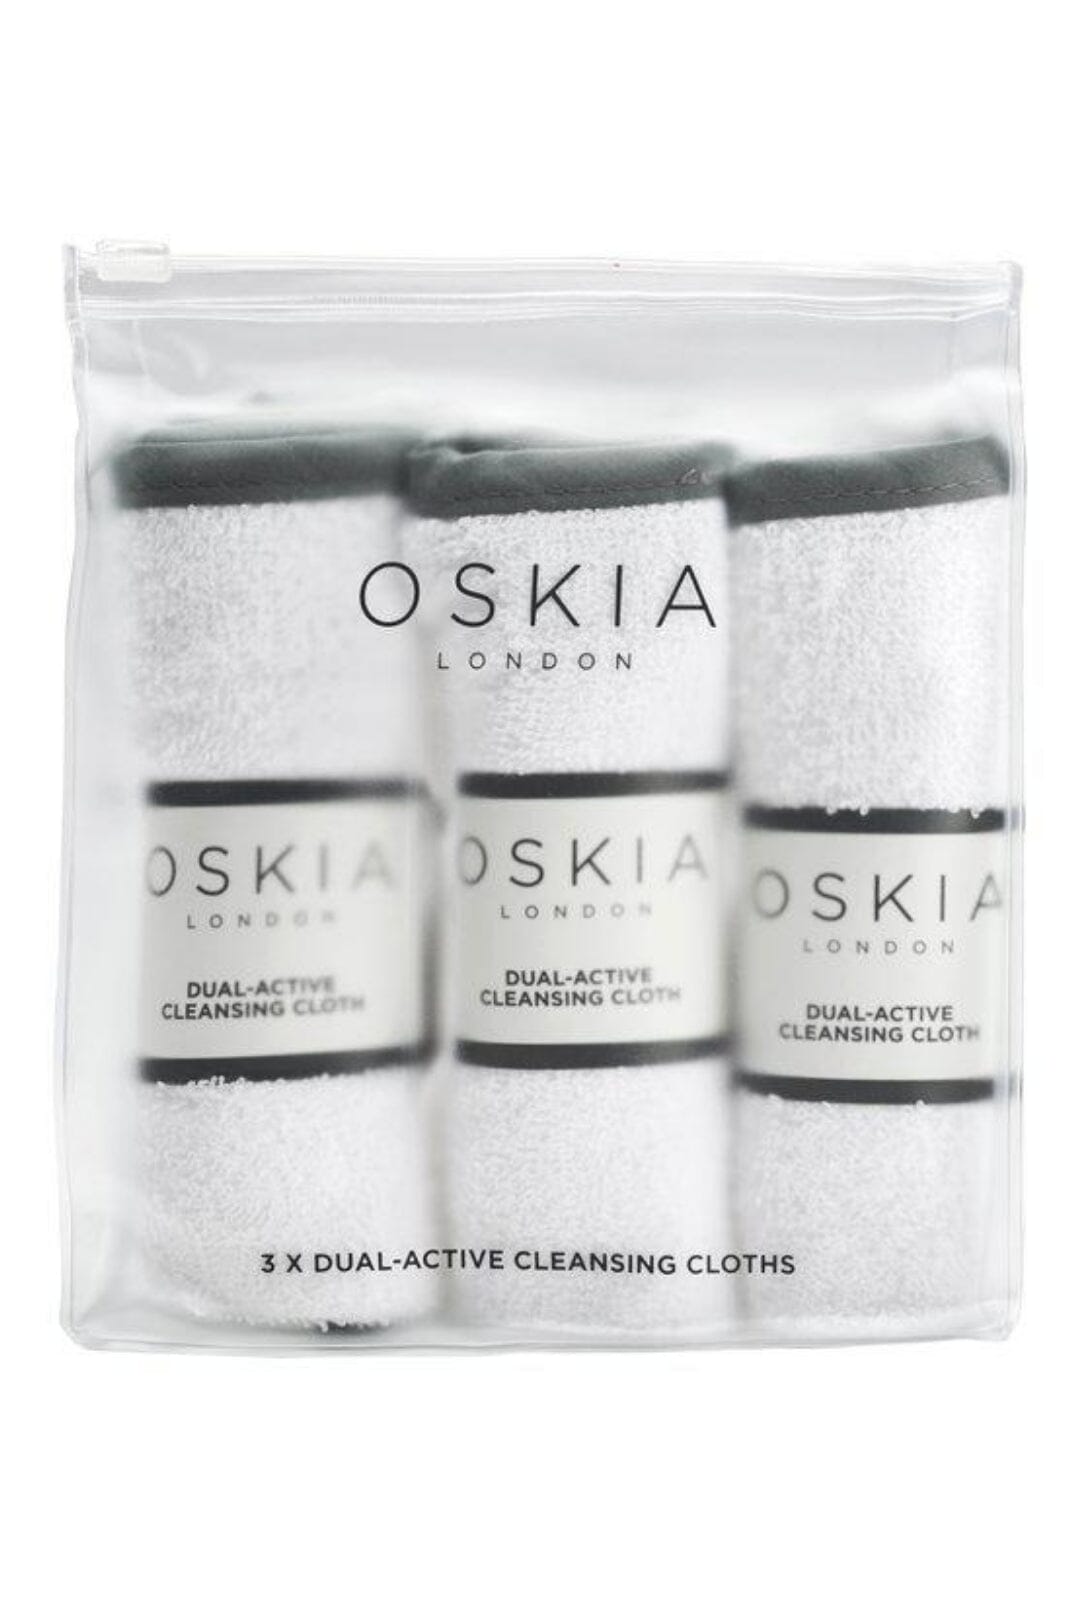 Oskia - 3xDual-Active Cleansing Cloths Bad 